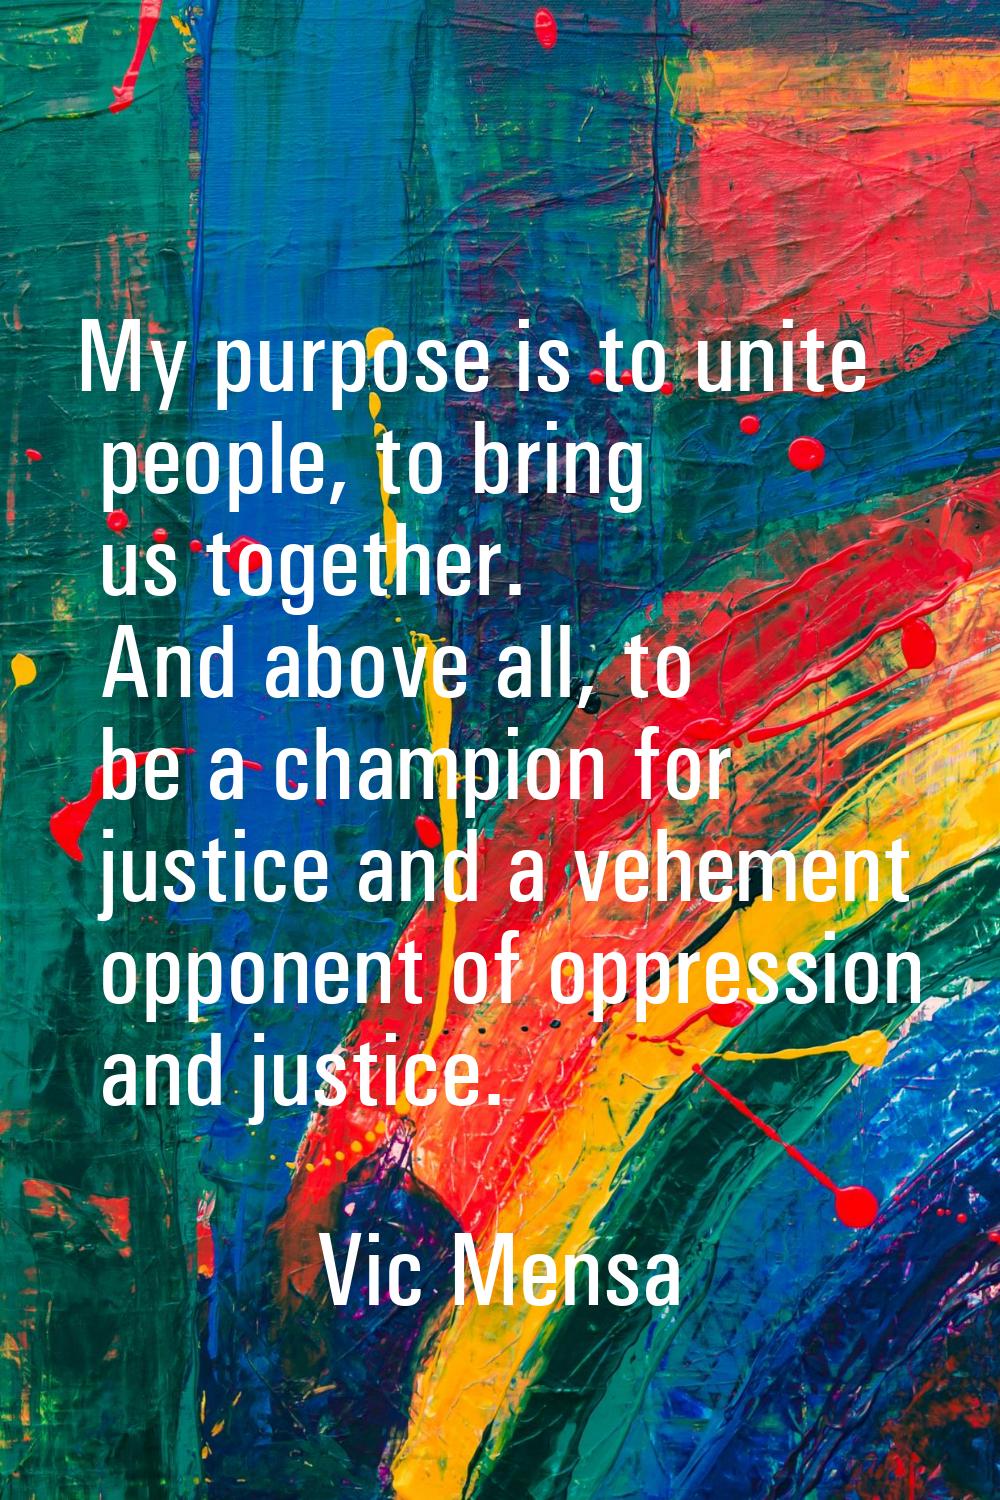 My purpose is to unite people, to bring us together. And above all, to be a champion for justice an